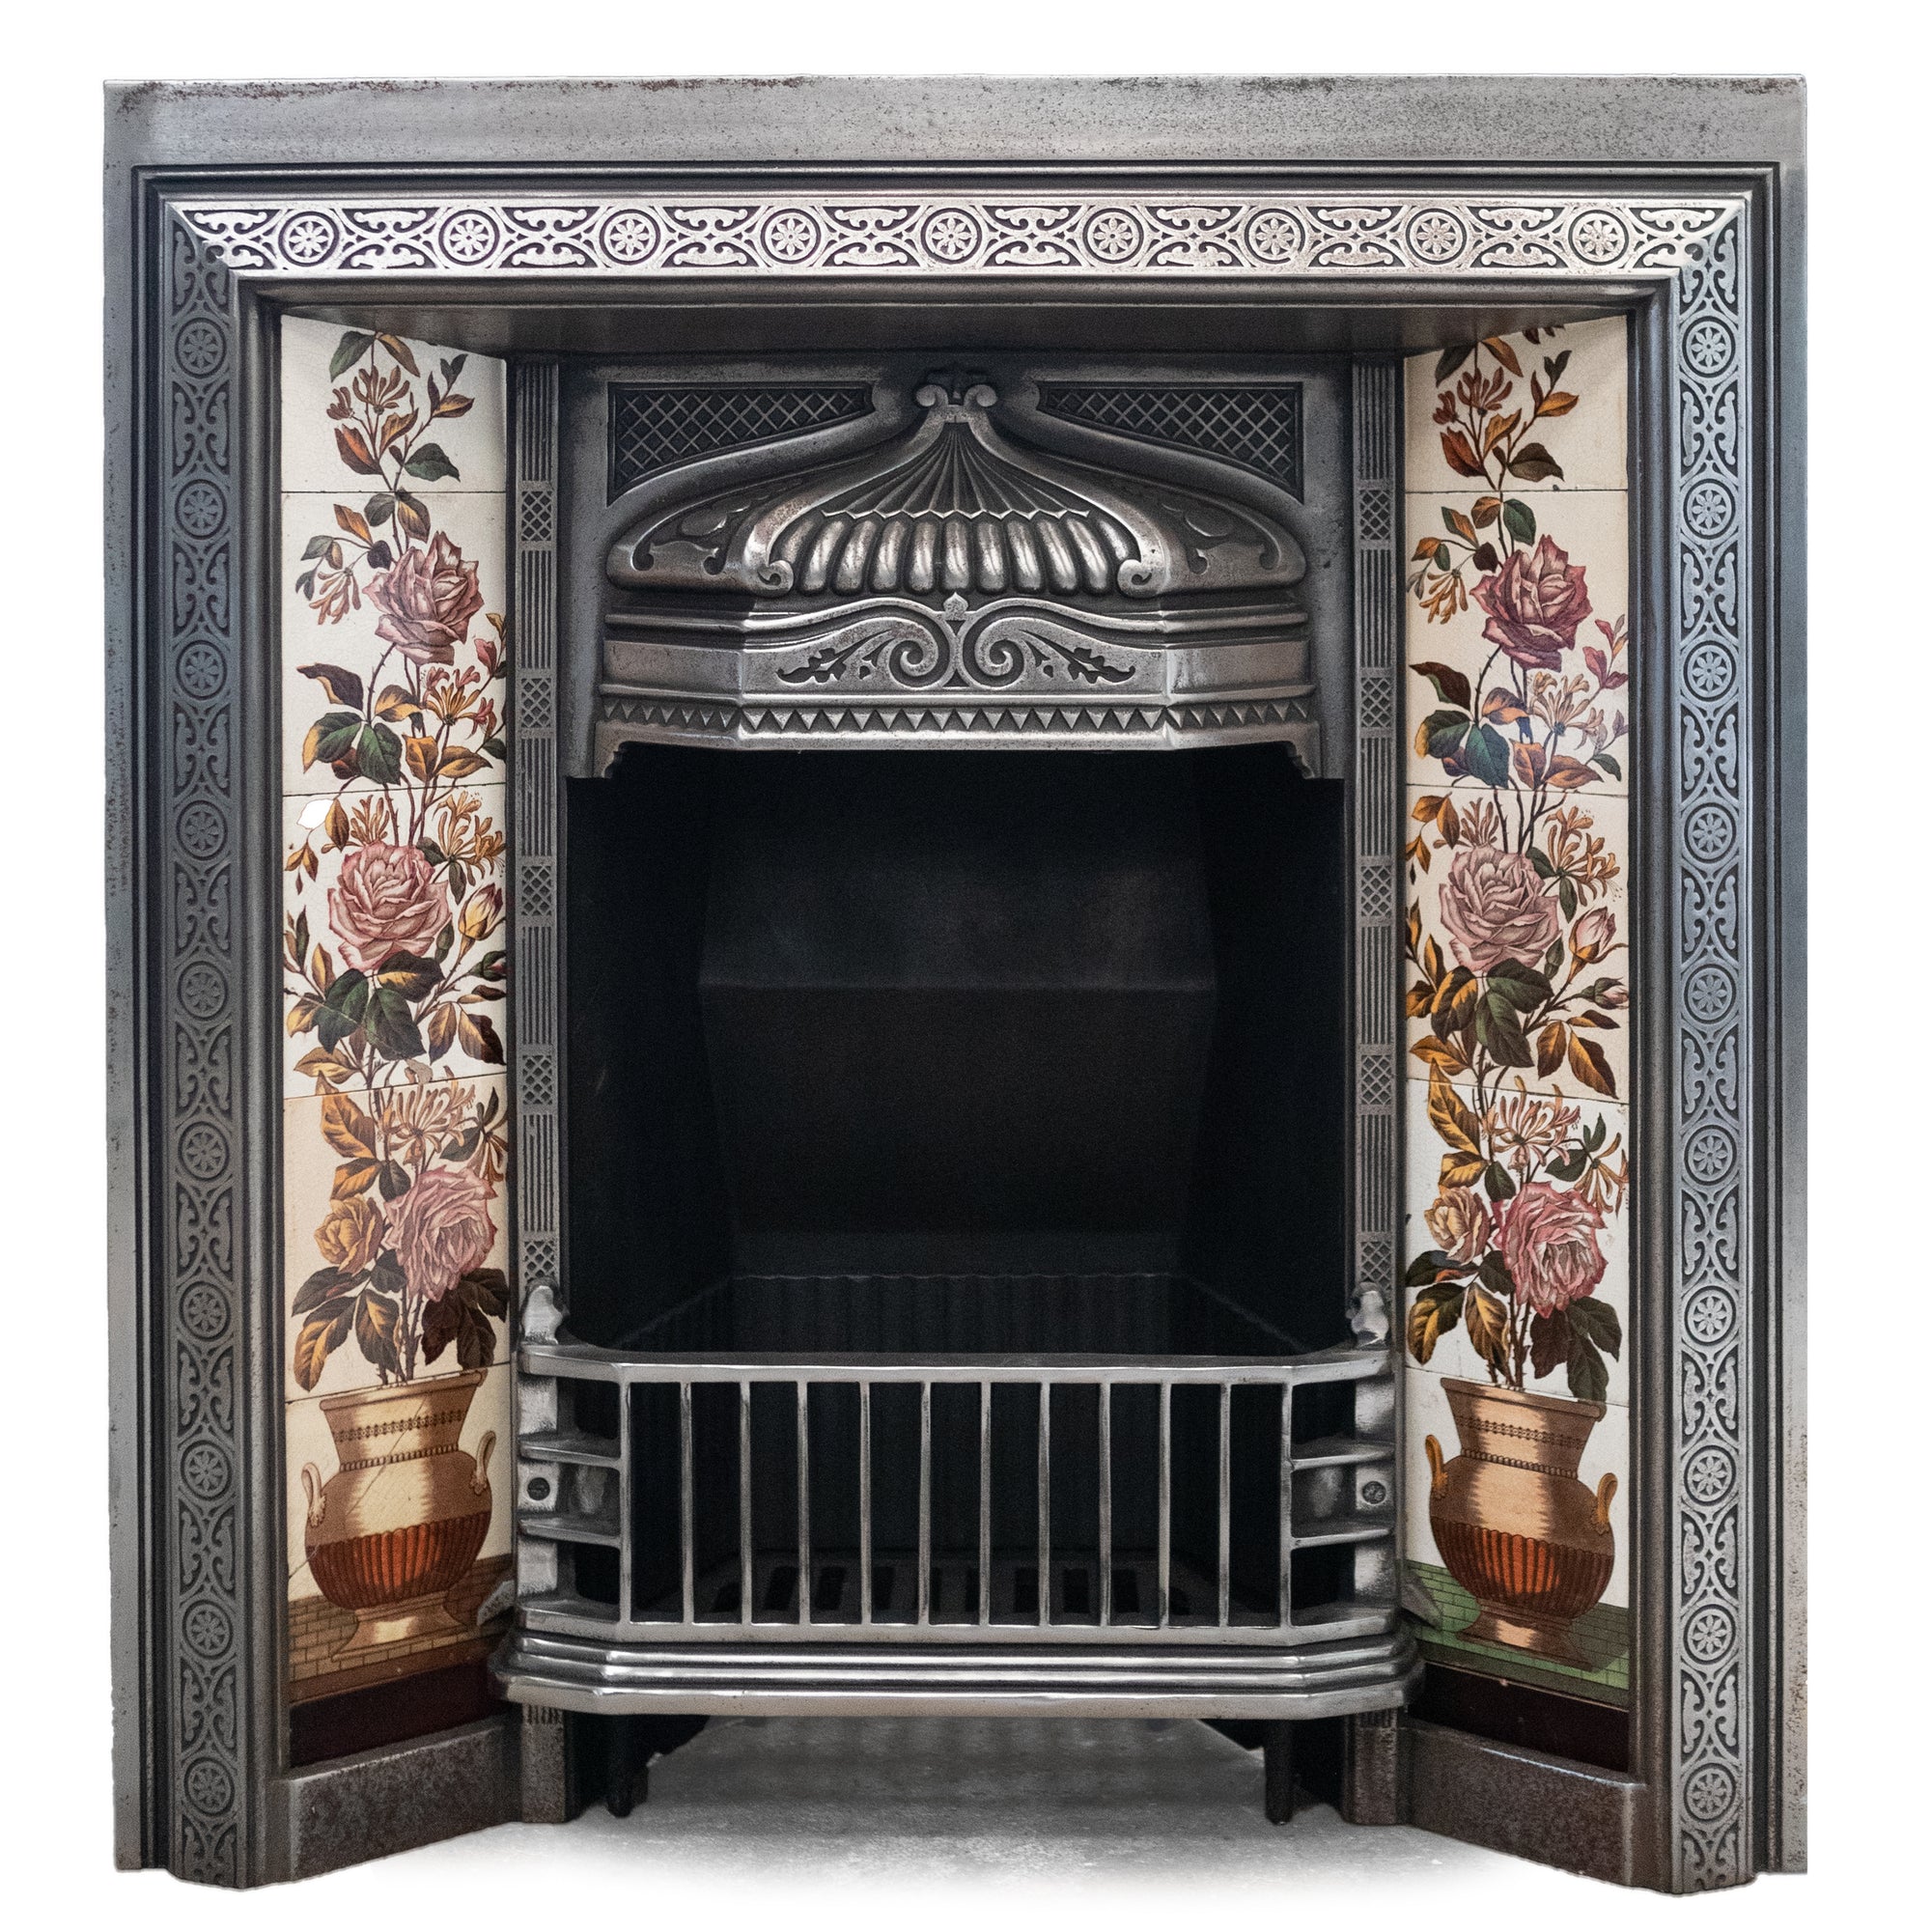 Antique Polished Cast Iron Fireplace Insert with Tiles | The Architectural Forum